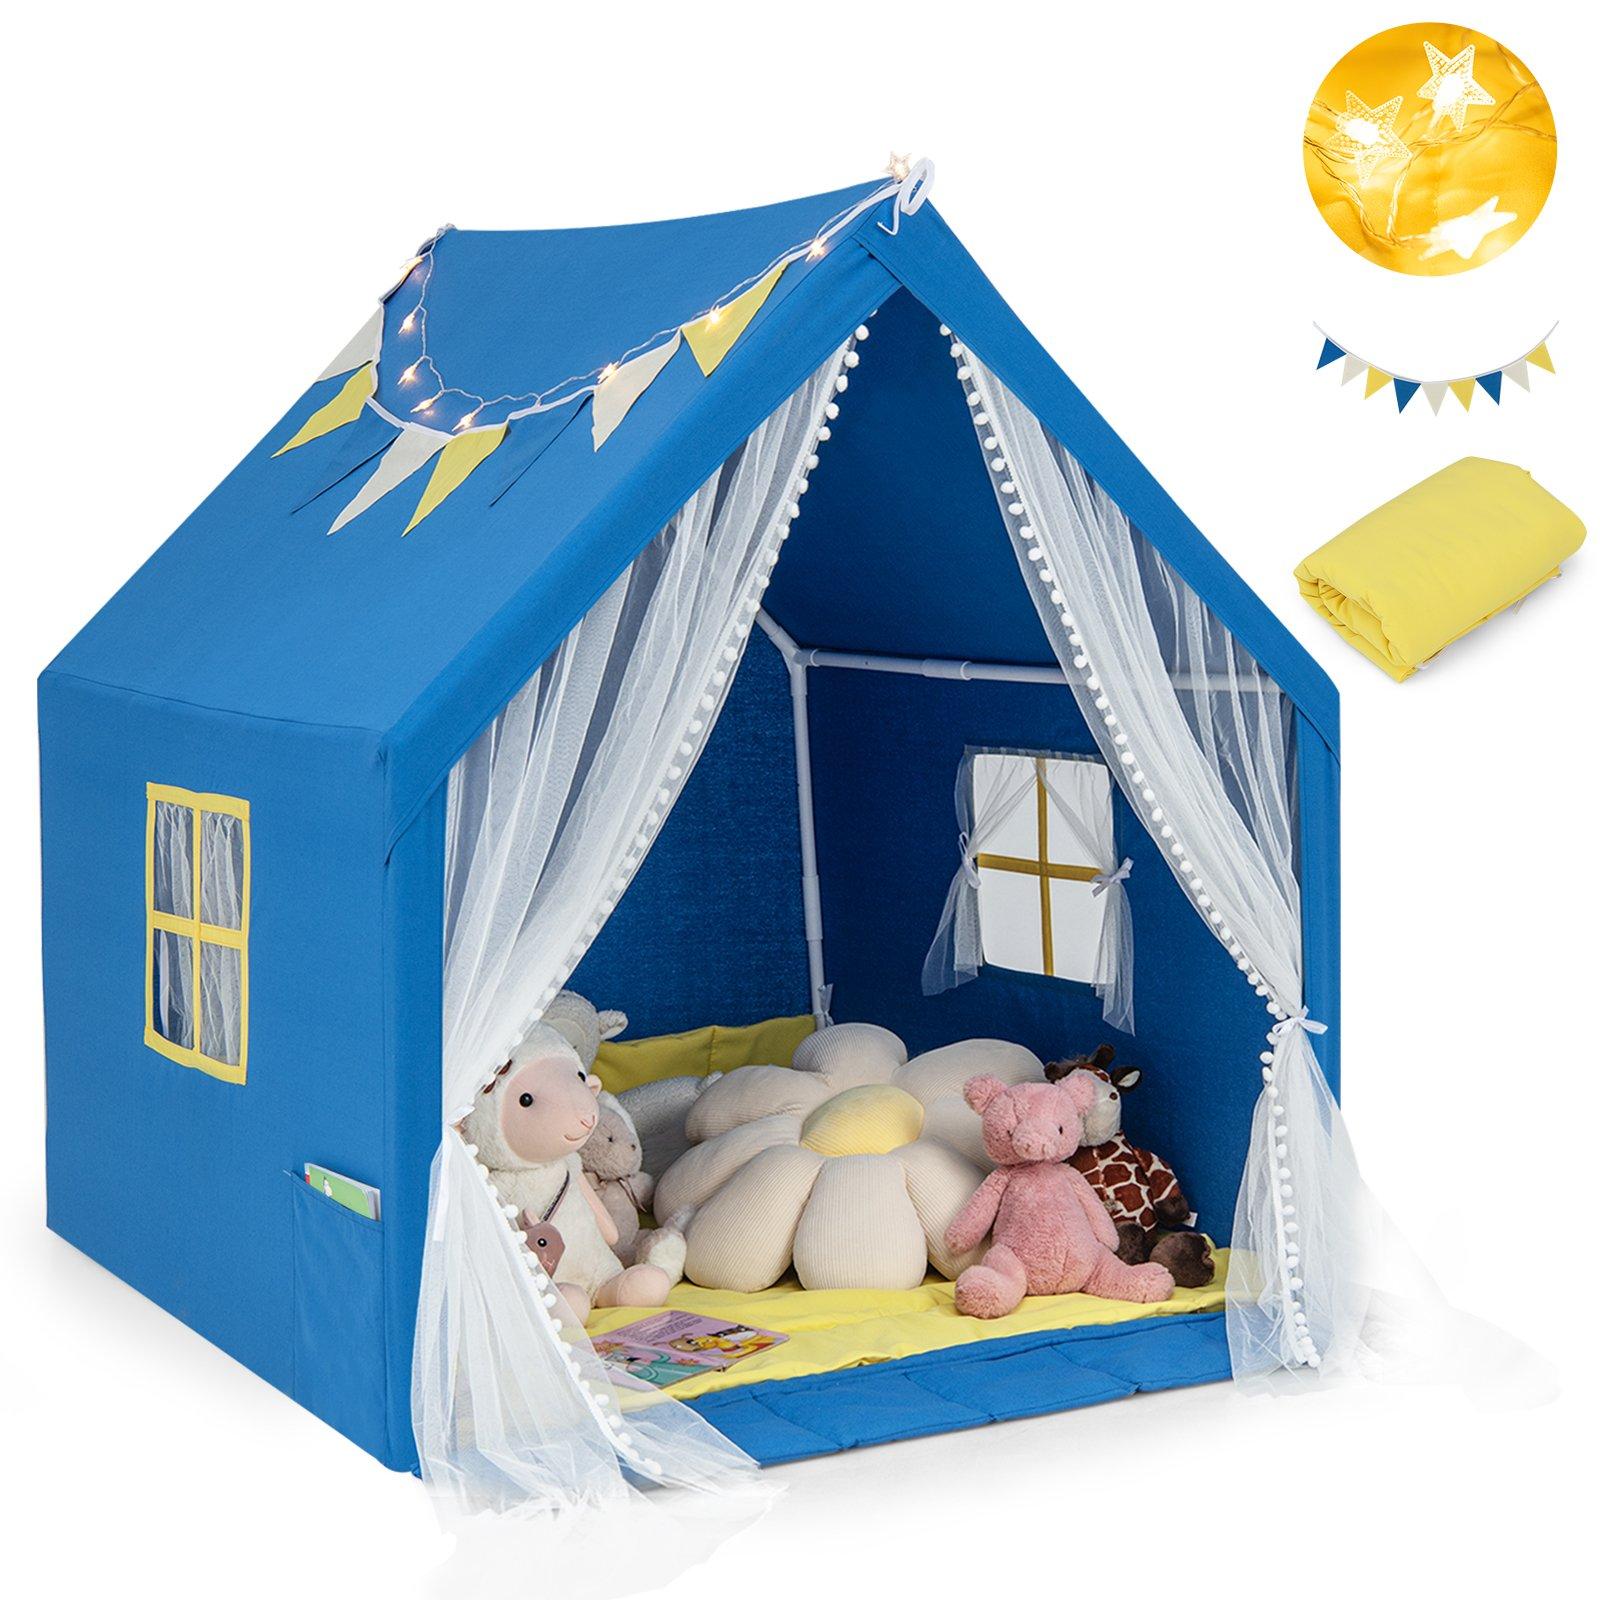 Kids Play Tent w/ Cotton Mat House-Shaped Kids Playhouse Castle Play Tent